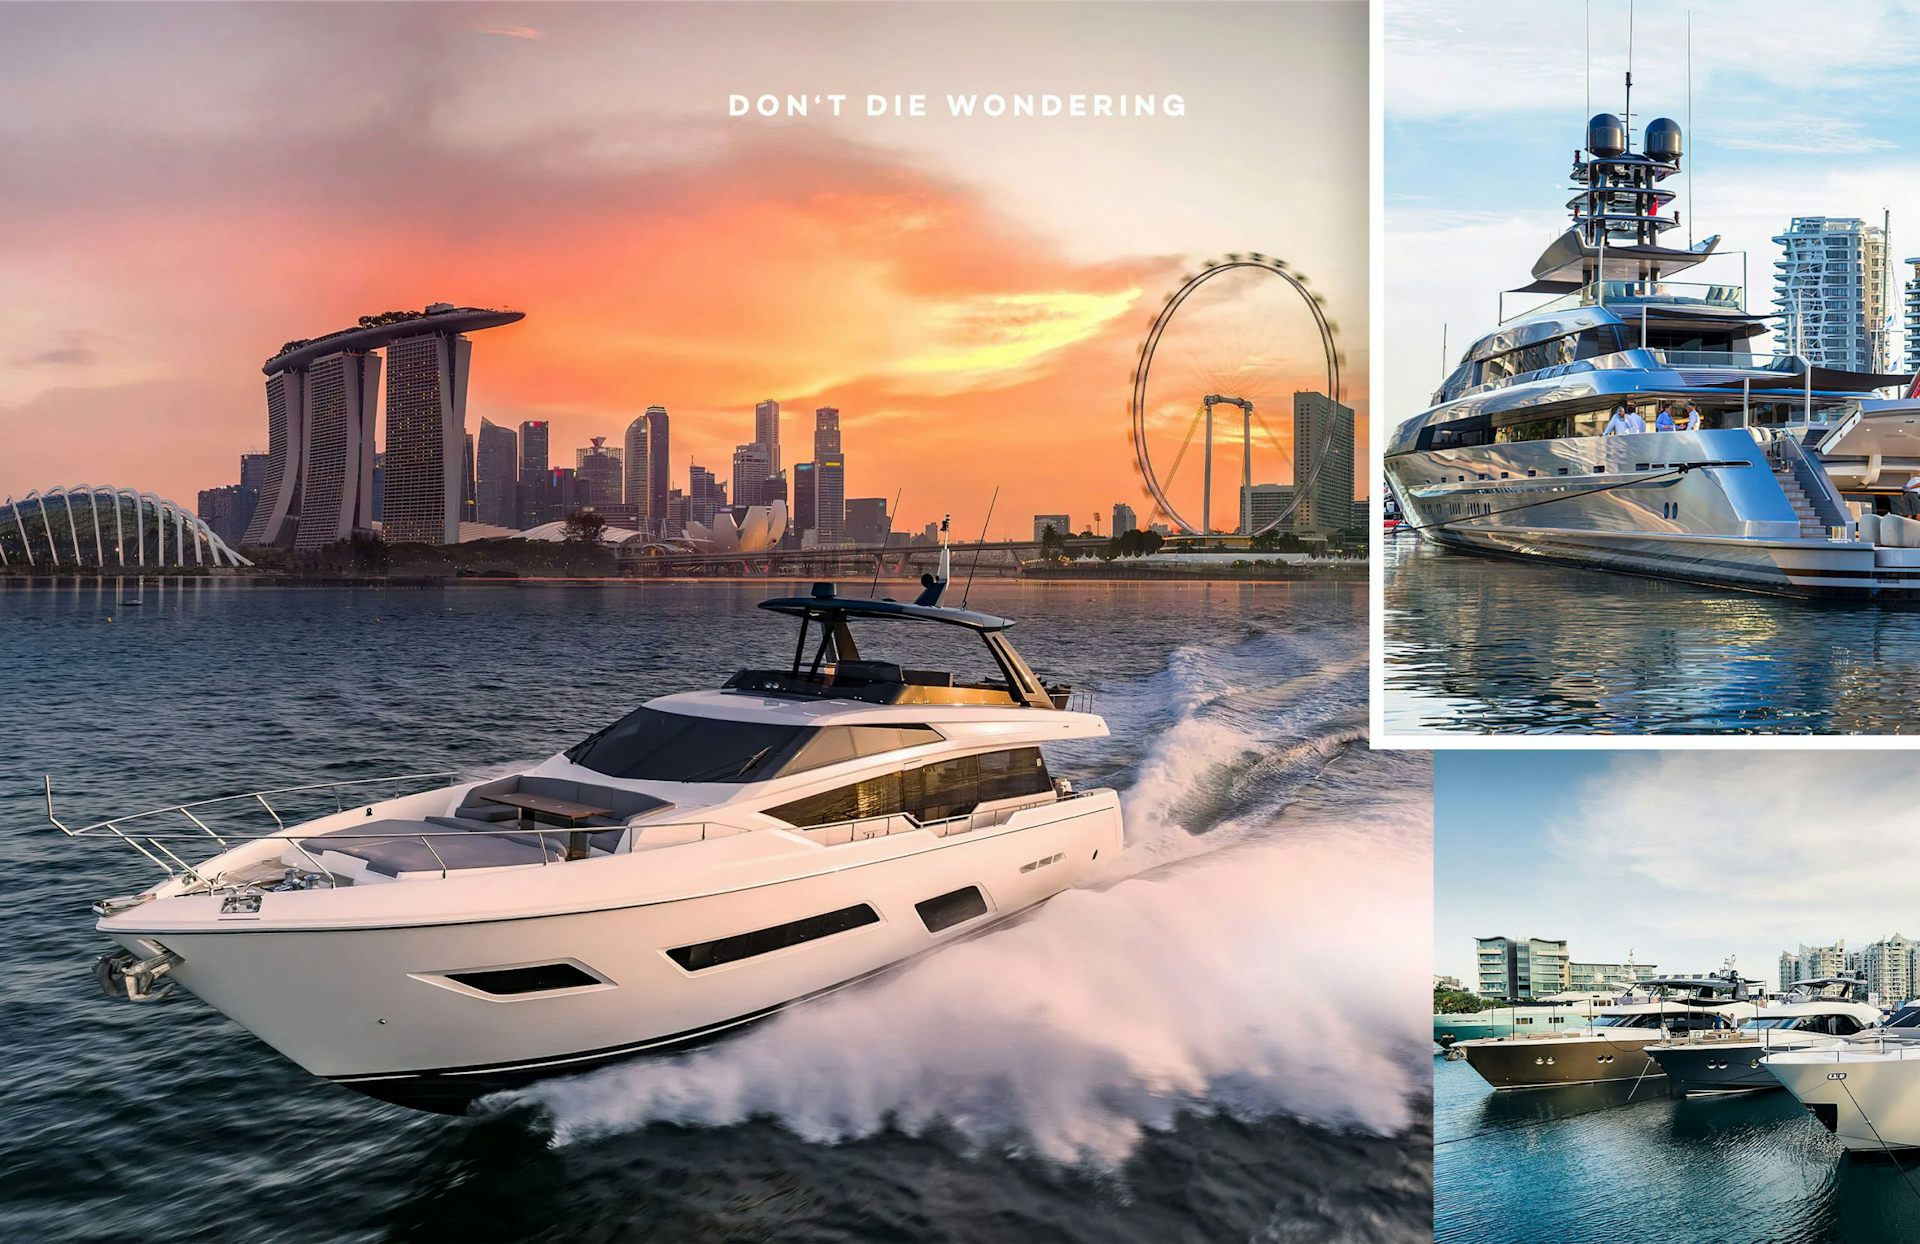 The Singapore Yacht Show 2022